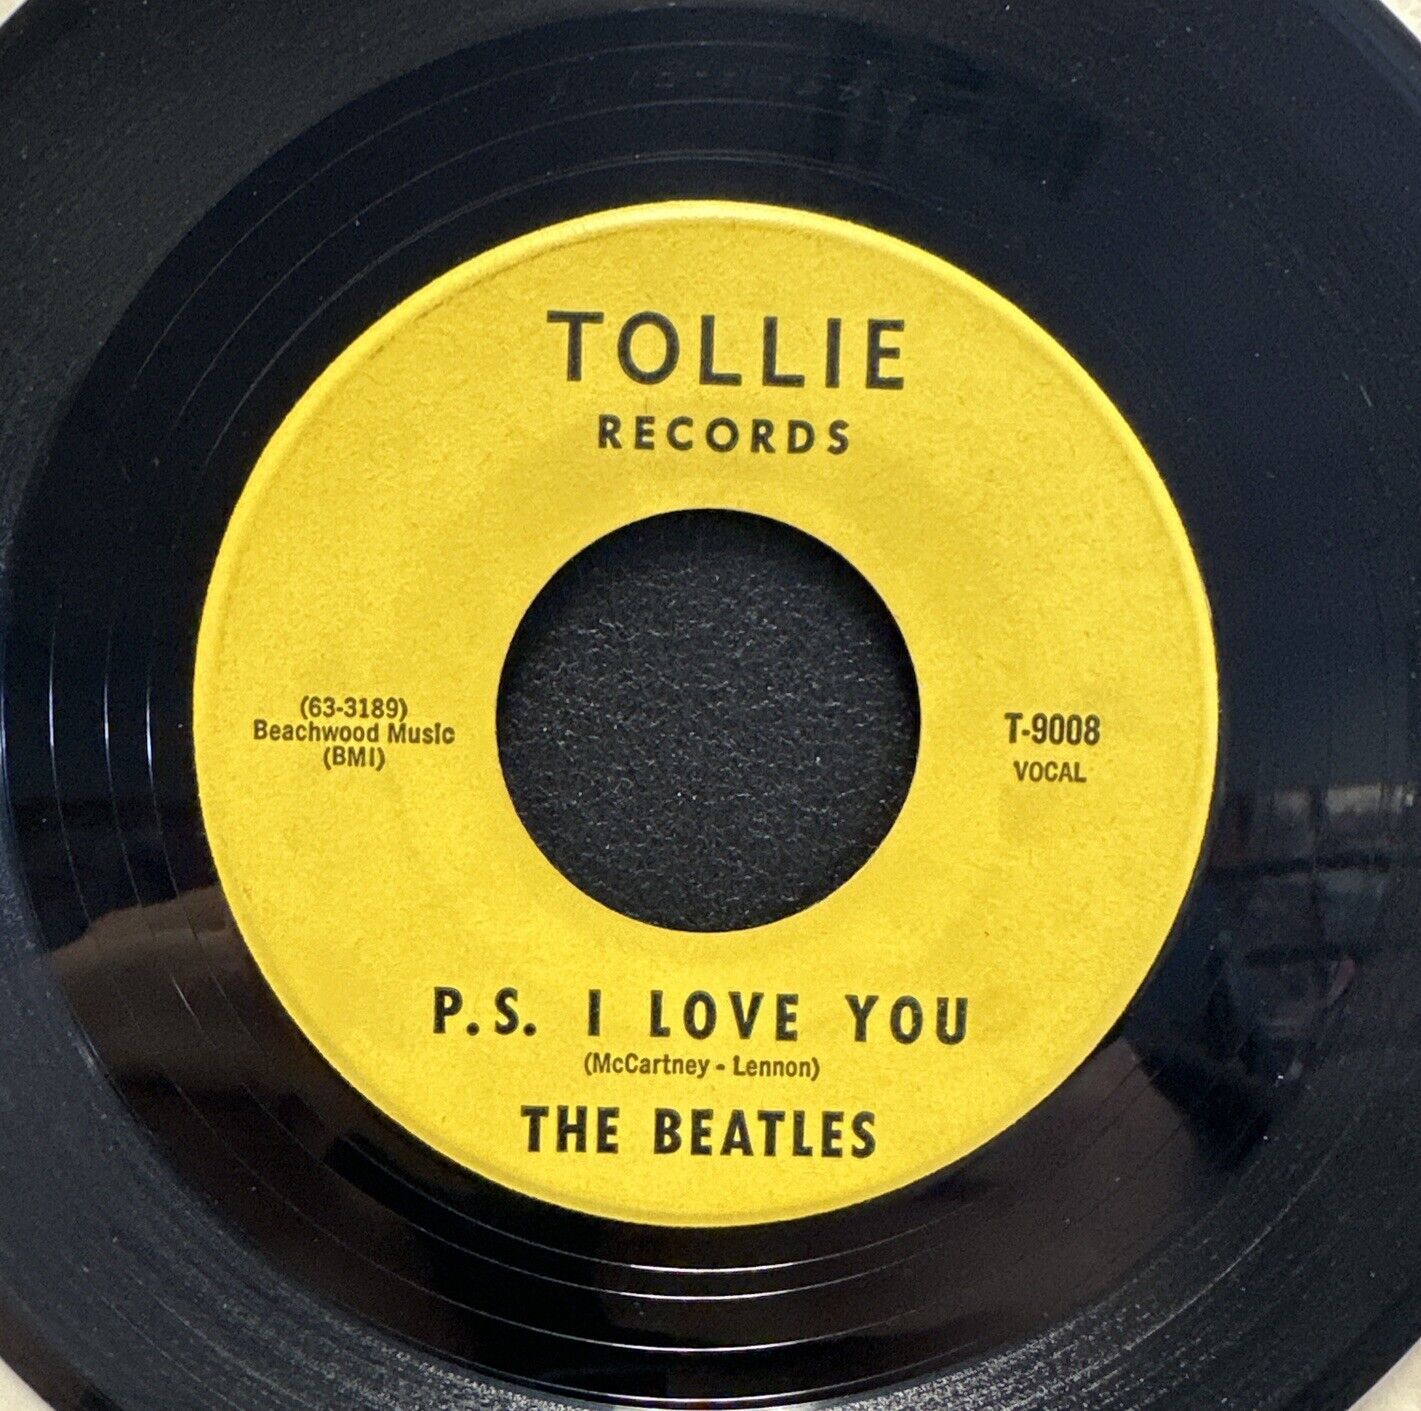 The Beatles - P.S. I Love You/Love Me Do - Tollie 45 VG POP ROCK